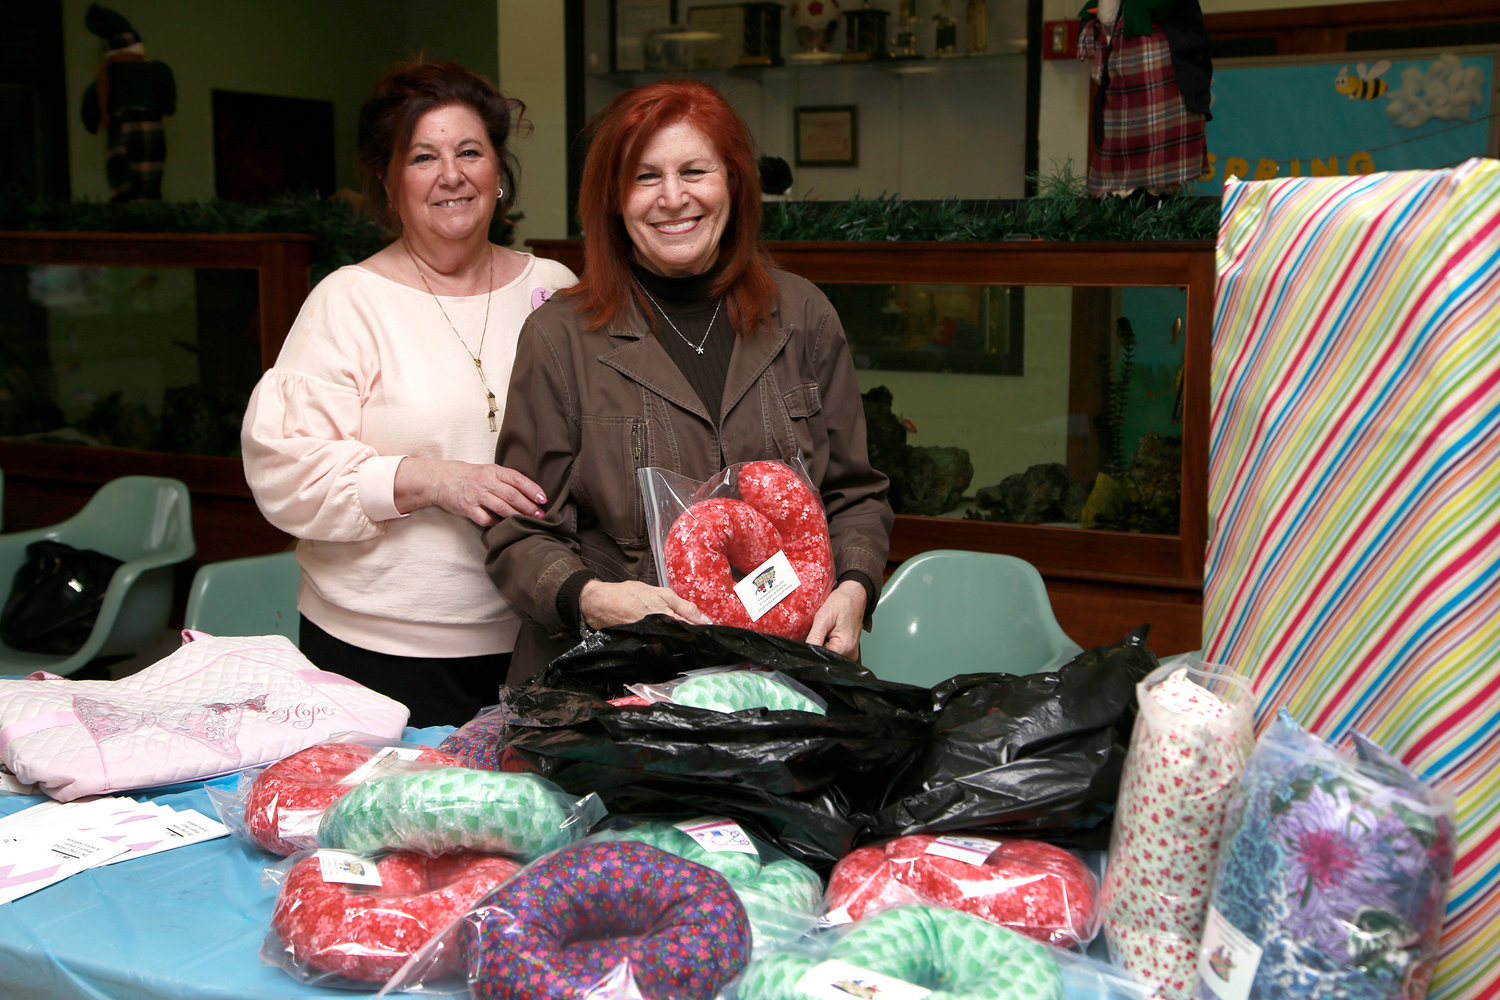 Geri Barish, of Hewlett House, was grateful for the neck pillows made by the Rockville Centre Homemakers, represented by Karen Alterson, the group’s co-president.